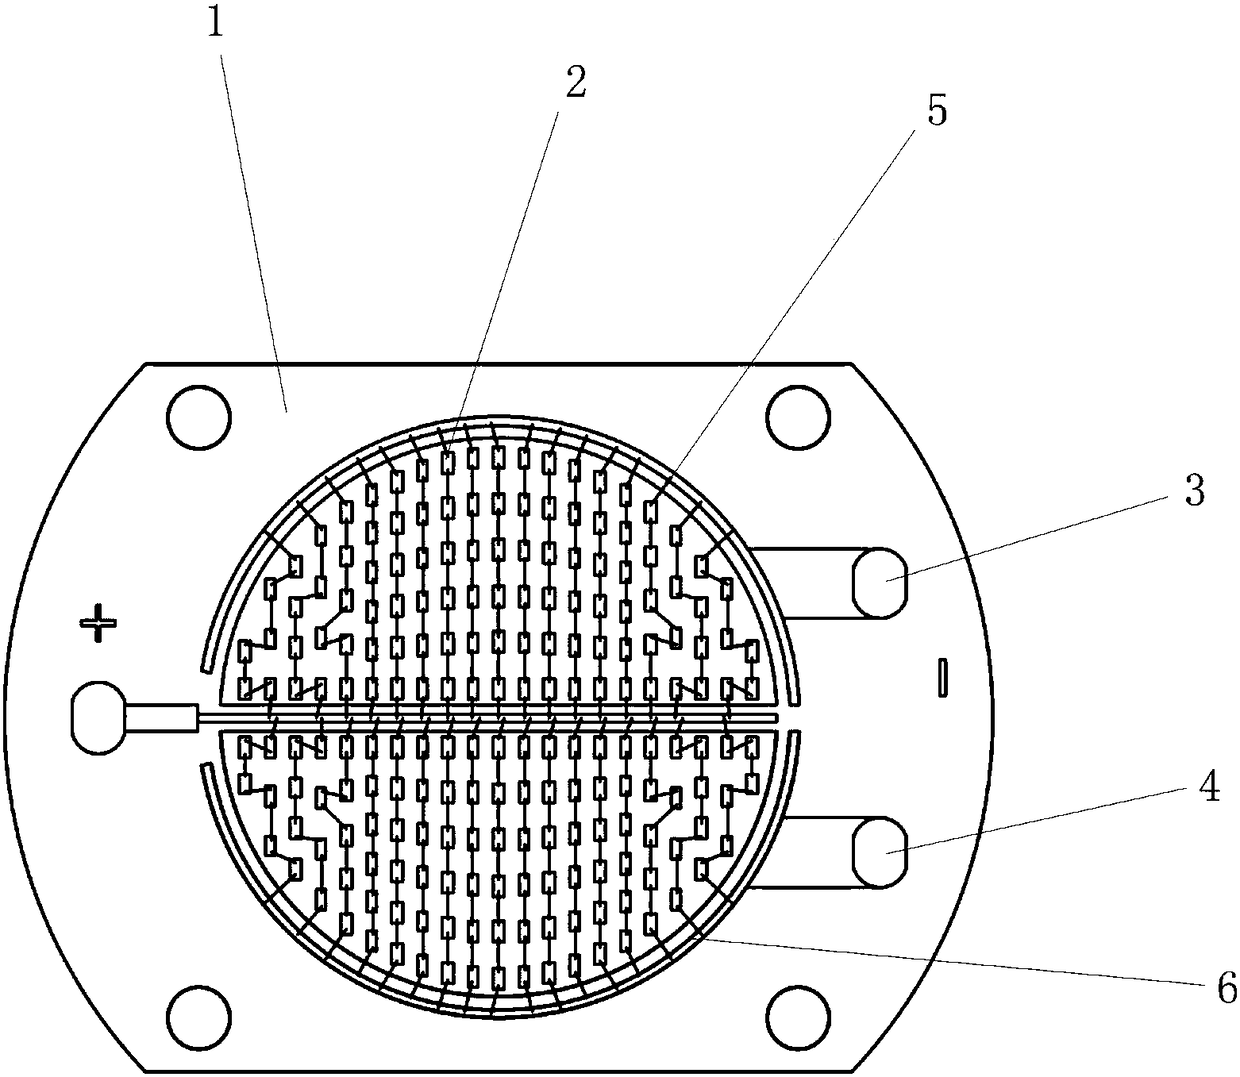 LED light source structure